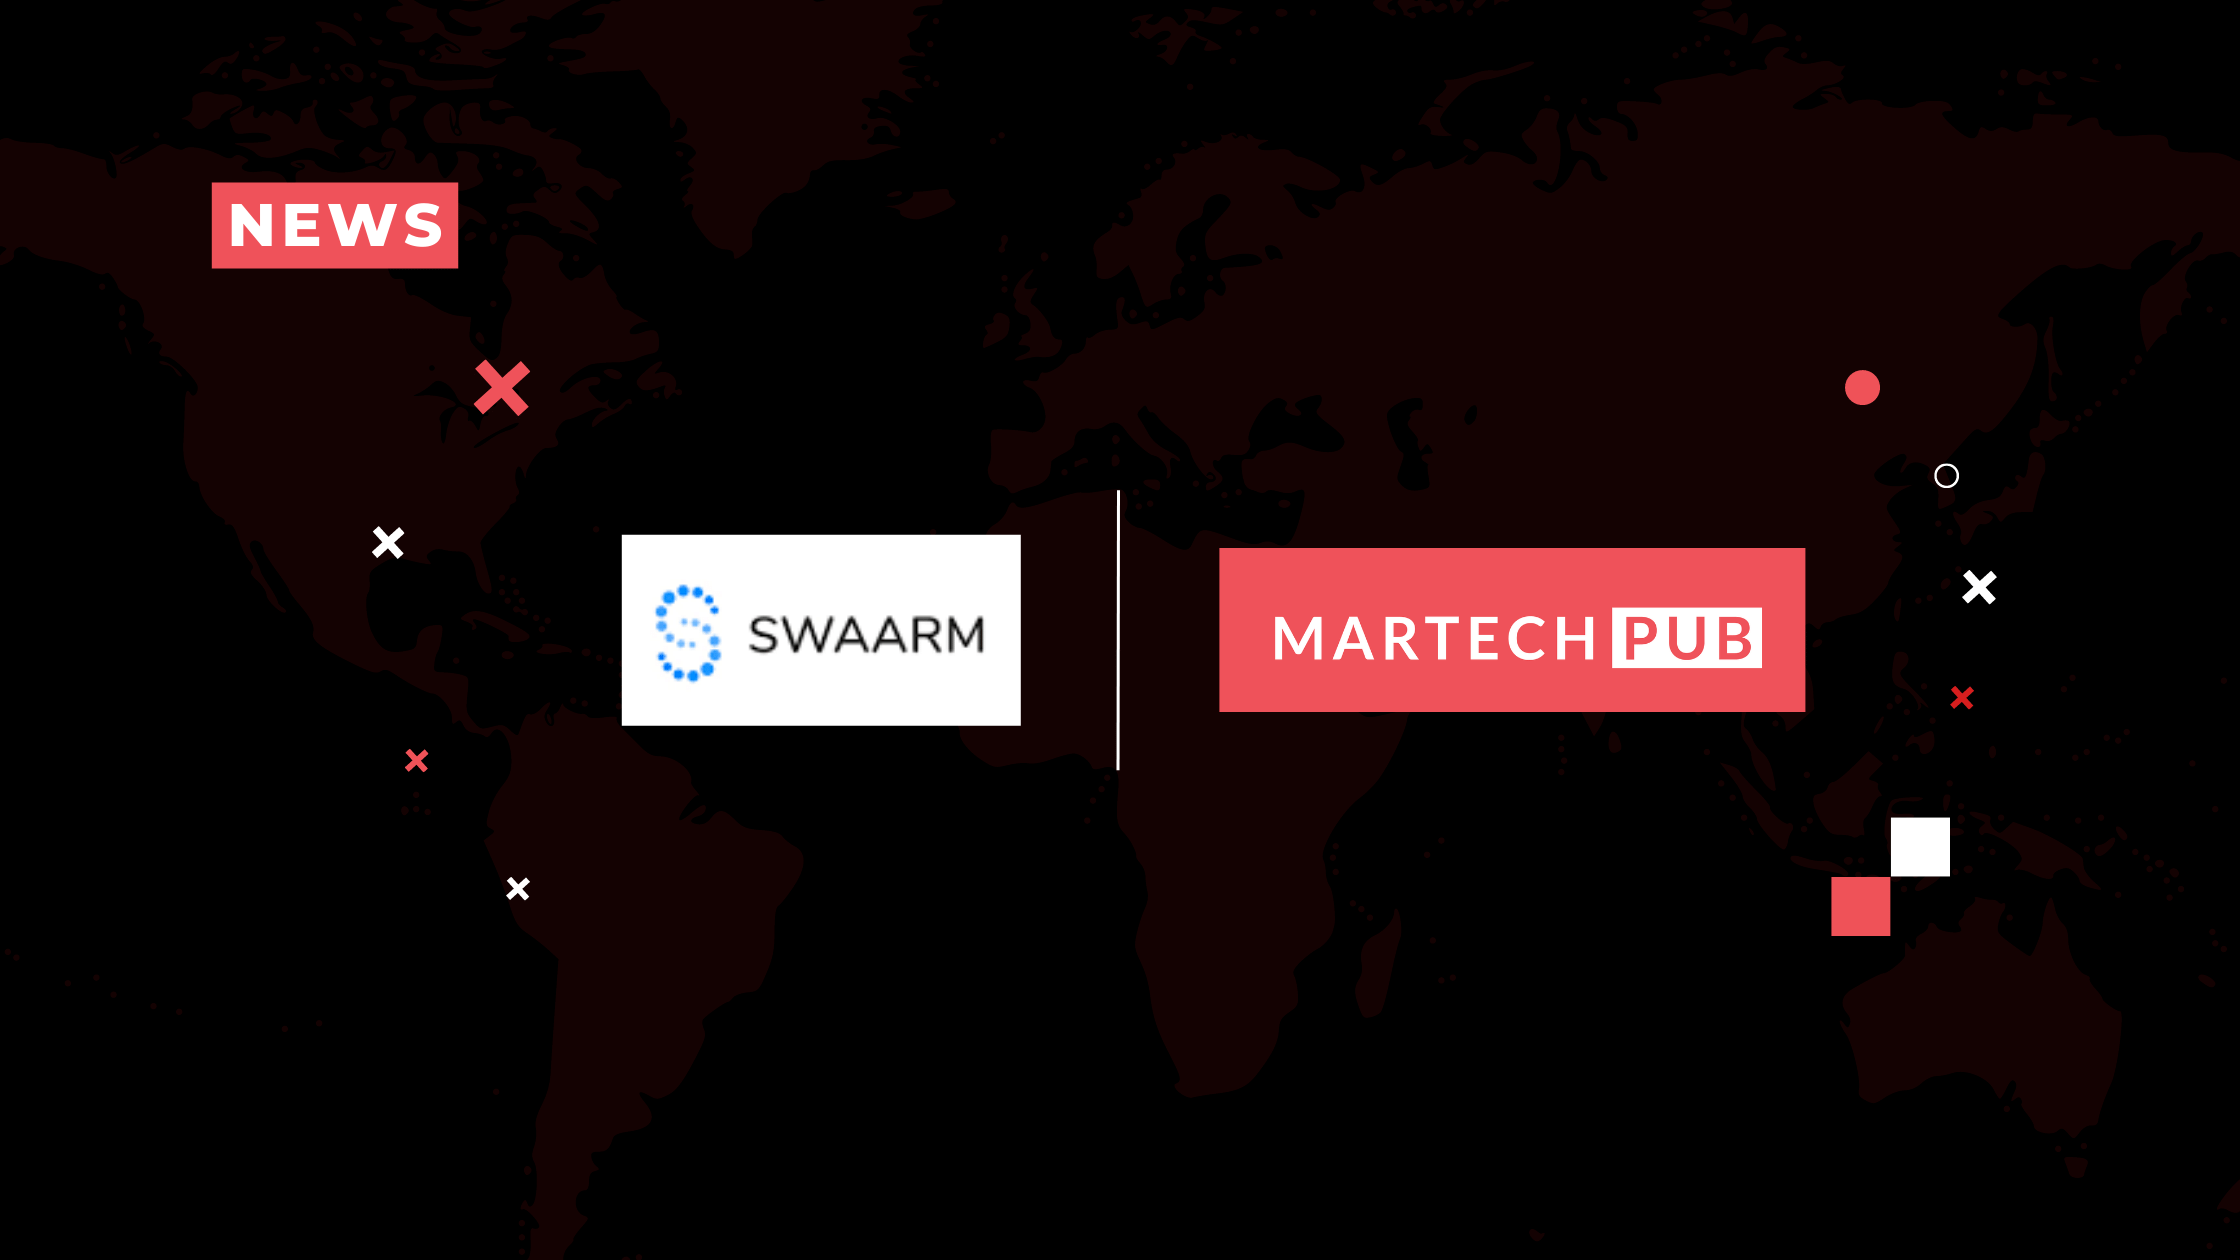 Advanced Privacy Suite by Swaarm is now available to help users navigate privacy changes in 2023 and beyond.